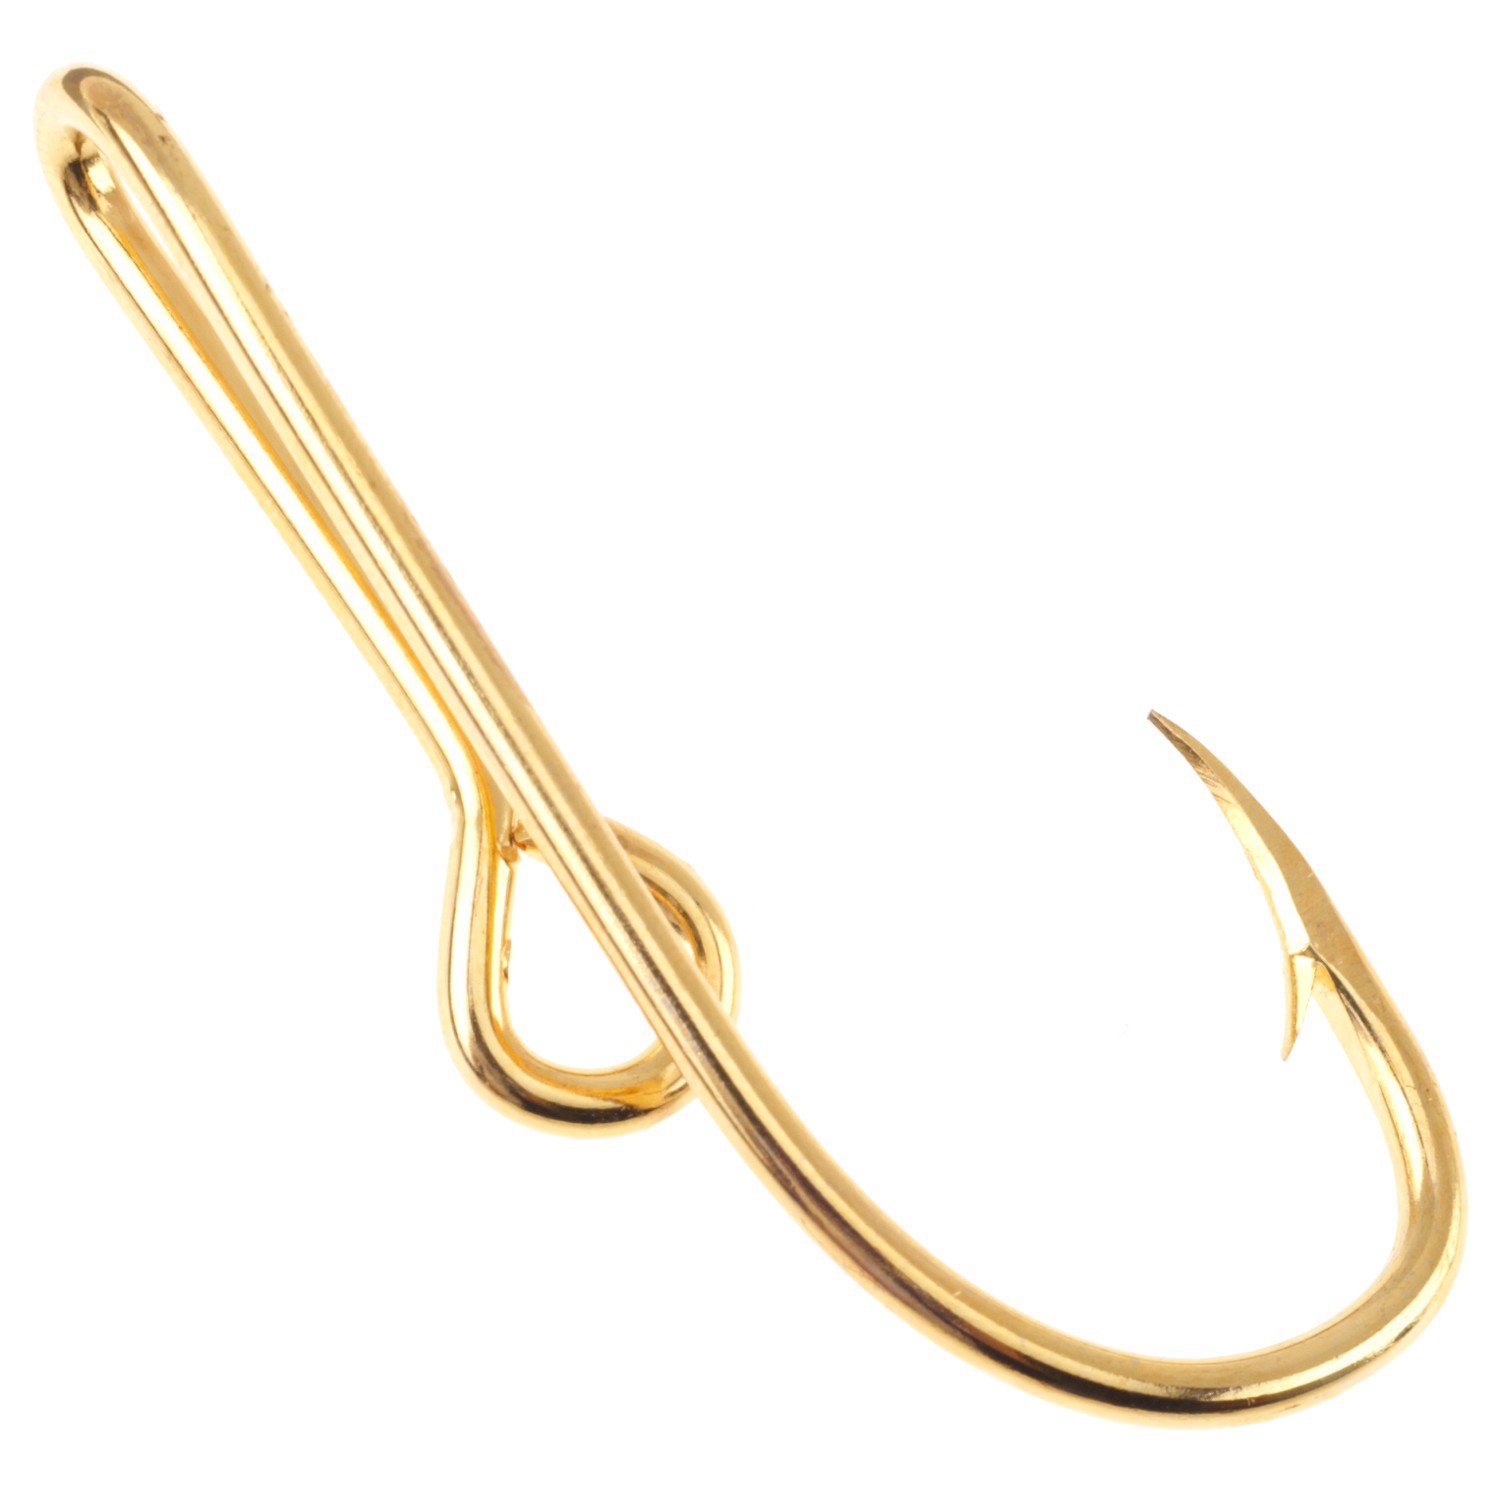 Details about   EAGLE CLAW HAT HOOK NEW Hat Pin Tie Clasp GOLD PLATED FISH HOOK HAT PIN 155AH 